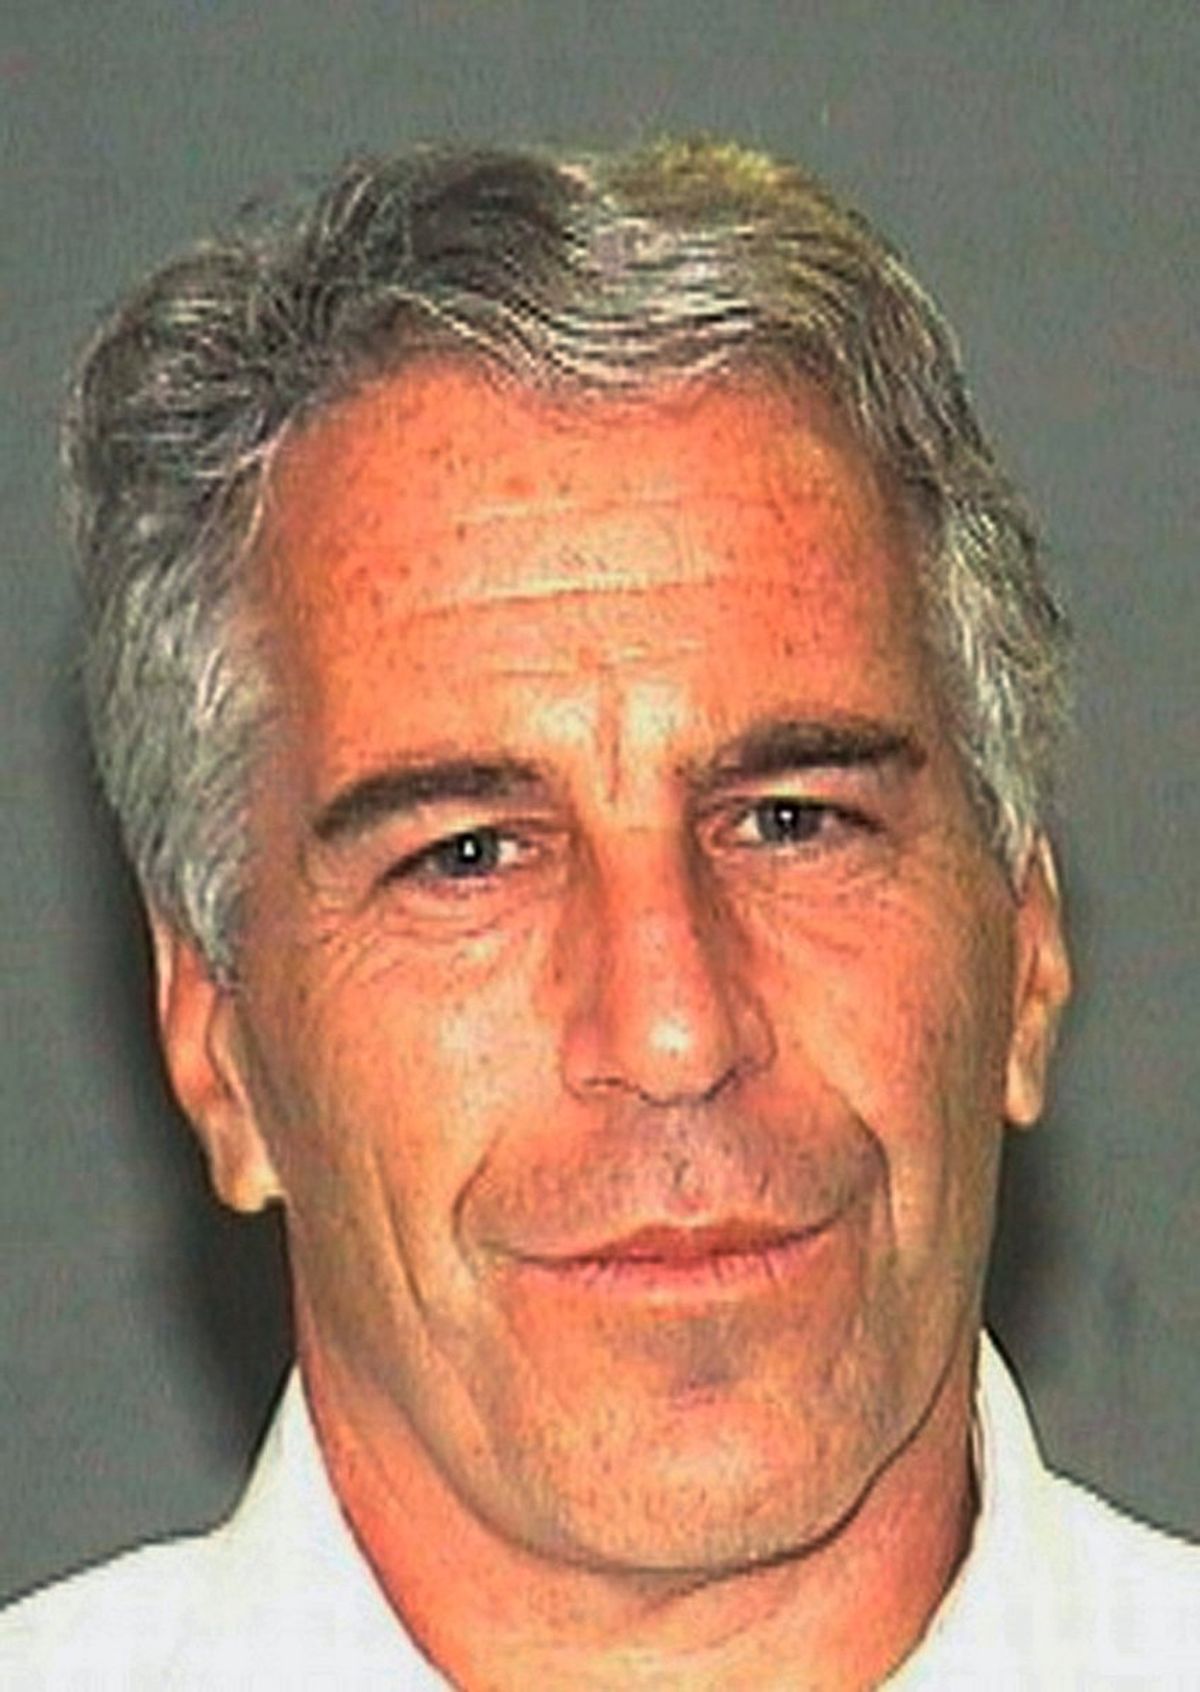 Sources: Jeffrey Epstein Arrested in NY on Sex Charges